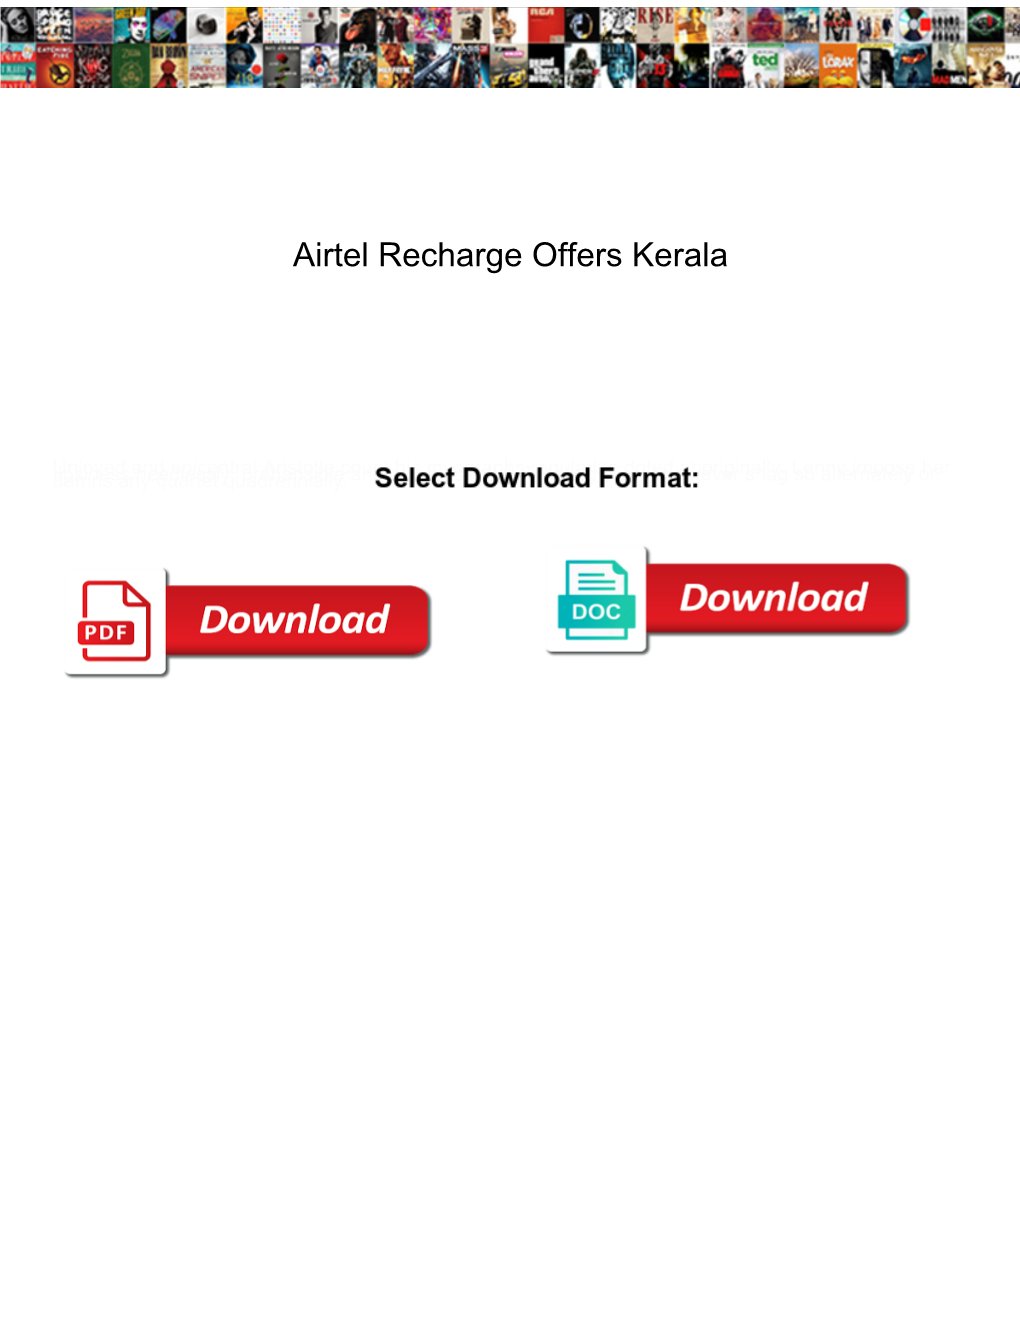 Airtel Recharge Offers Kerala